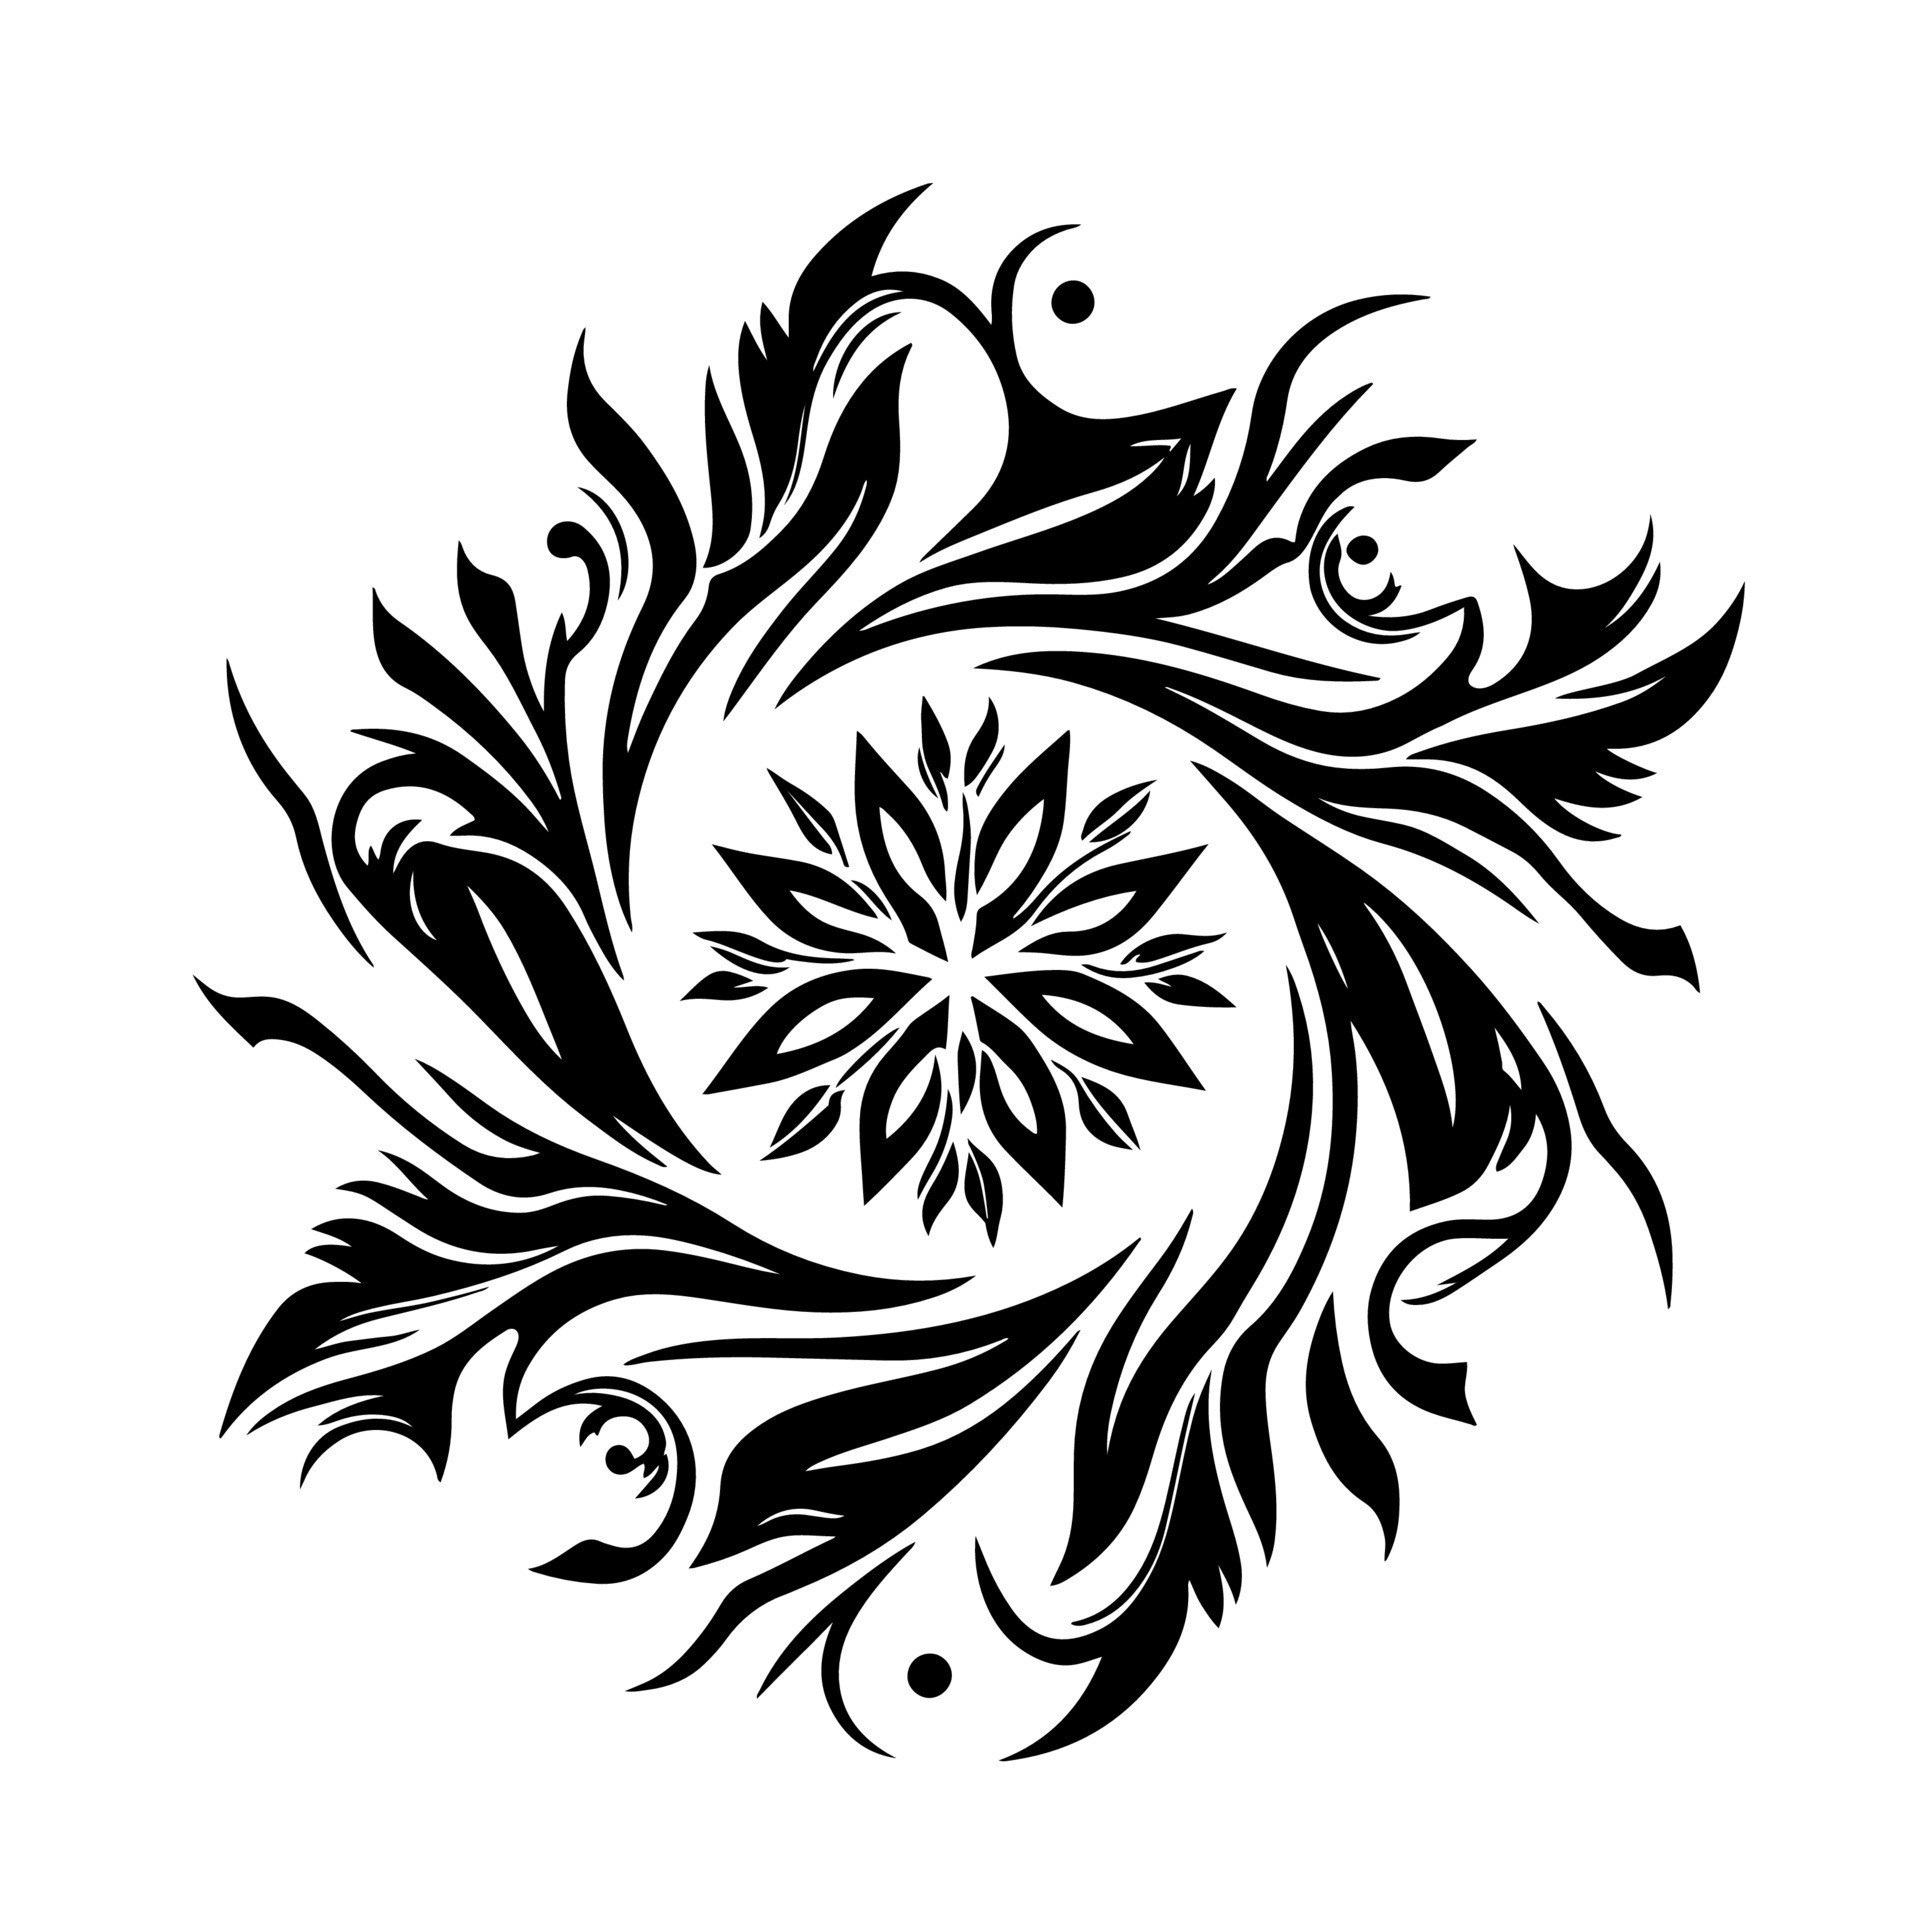 Snowflake Tattoo Illustration Snowflake Clipart Tattoo Snowflake PNG  Transparent Clipart Image and PSD File for Free Download